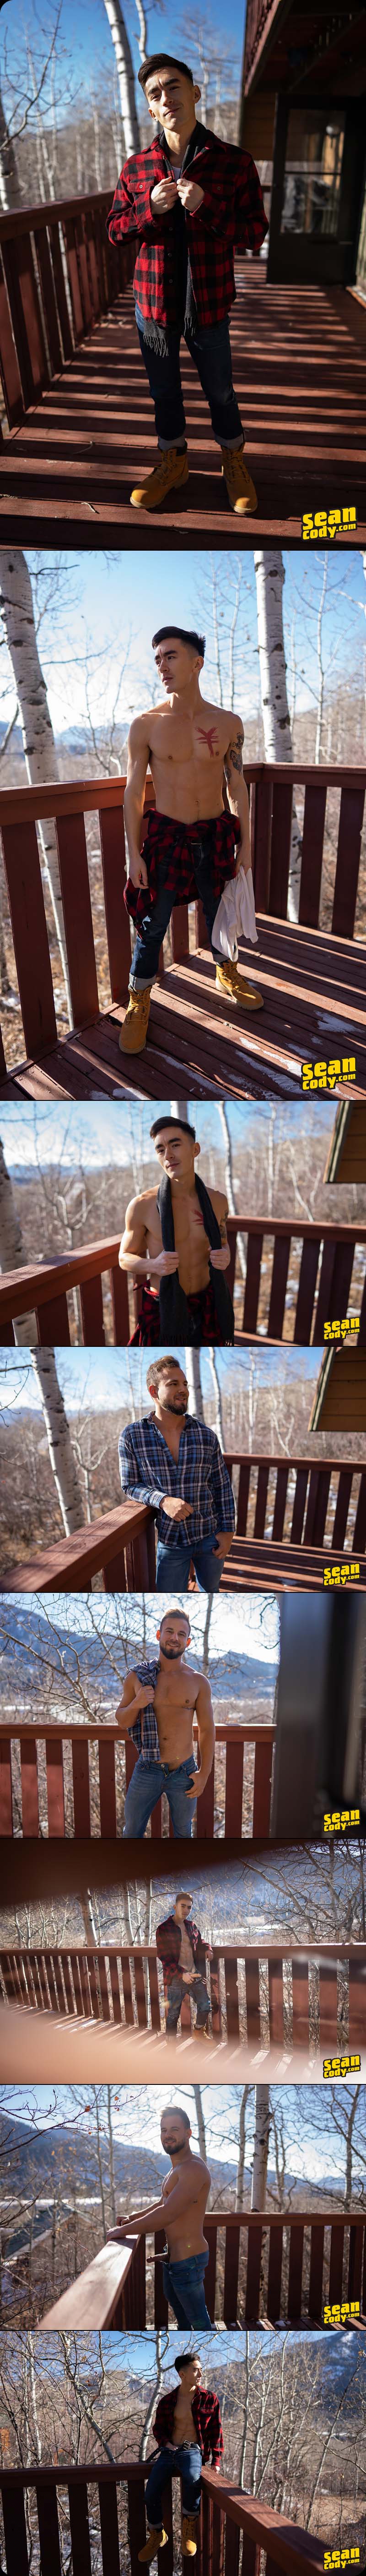 The Cabin, Episode Two [Josh Fucks Cody Seiya Outside While Sean Blows Justin and Devy Inside] at SeanCody